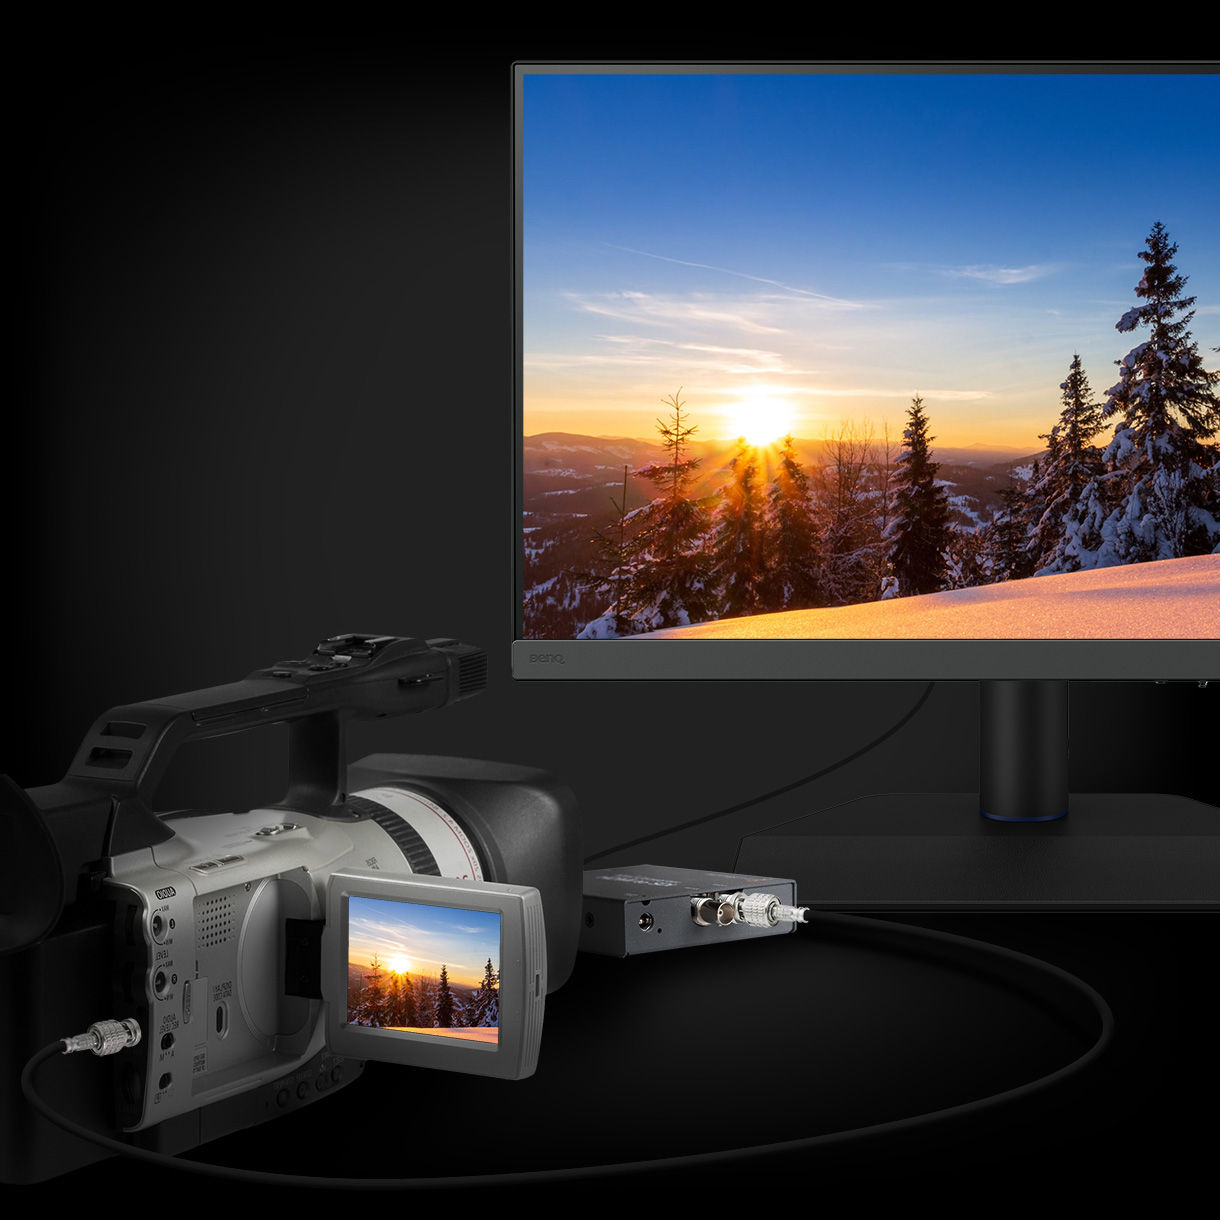 BenQ has tested select SDI to HDMI devices as compatible with SW272Q. Videographers can thus connect their SDI devices to the monitor for stable and non-compressed signal transmission and real quality video image. 